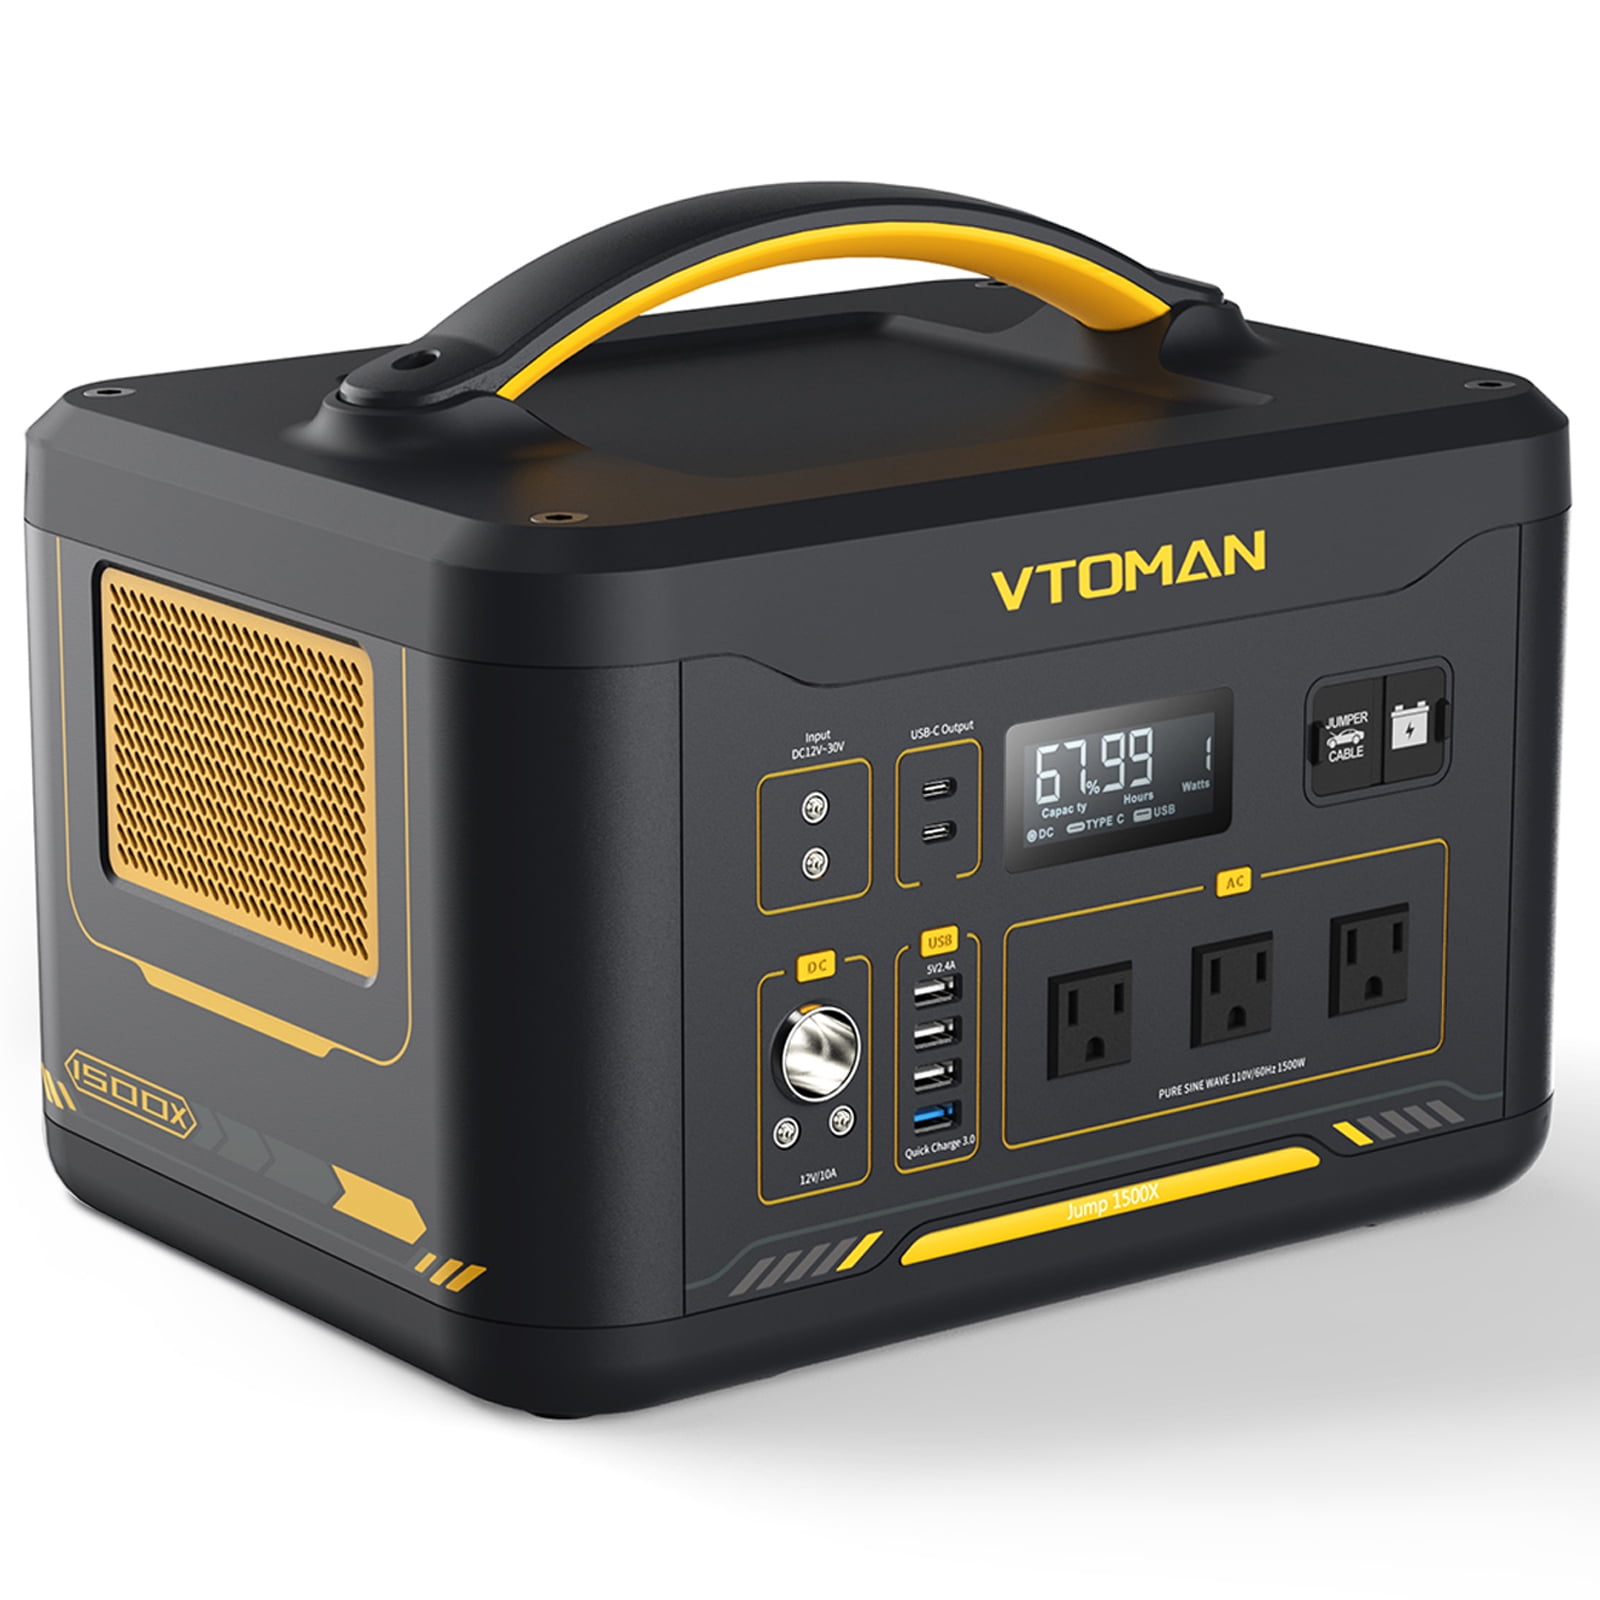 Portable Power Station 1228Wh/1500W, VDL HS1500 LiFePO4 Solar Generator  Fully Charged 2 Hours, 6x110V Pure Sinewave AC Outlets Backup Battery Power